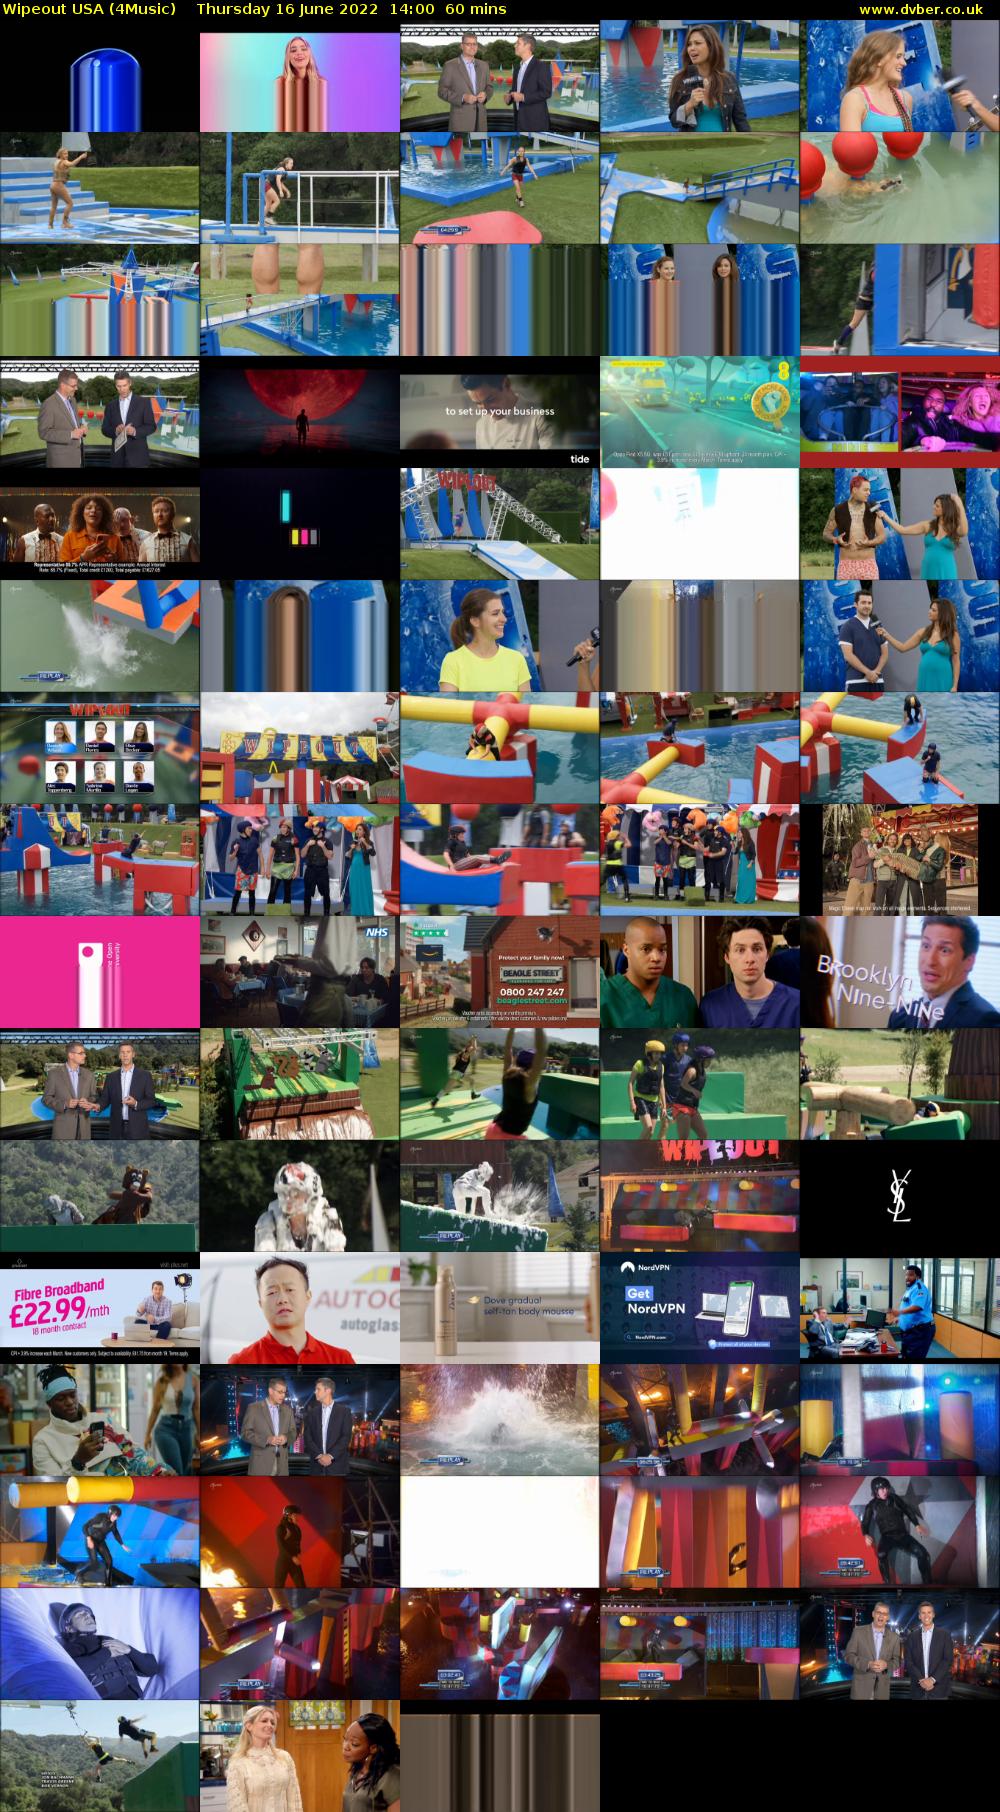 Wipeout USA (4Music) Thursday 16 June 2022 14:00 - 15:00